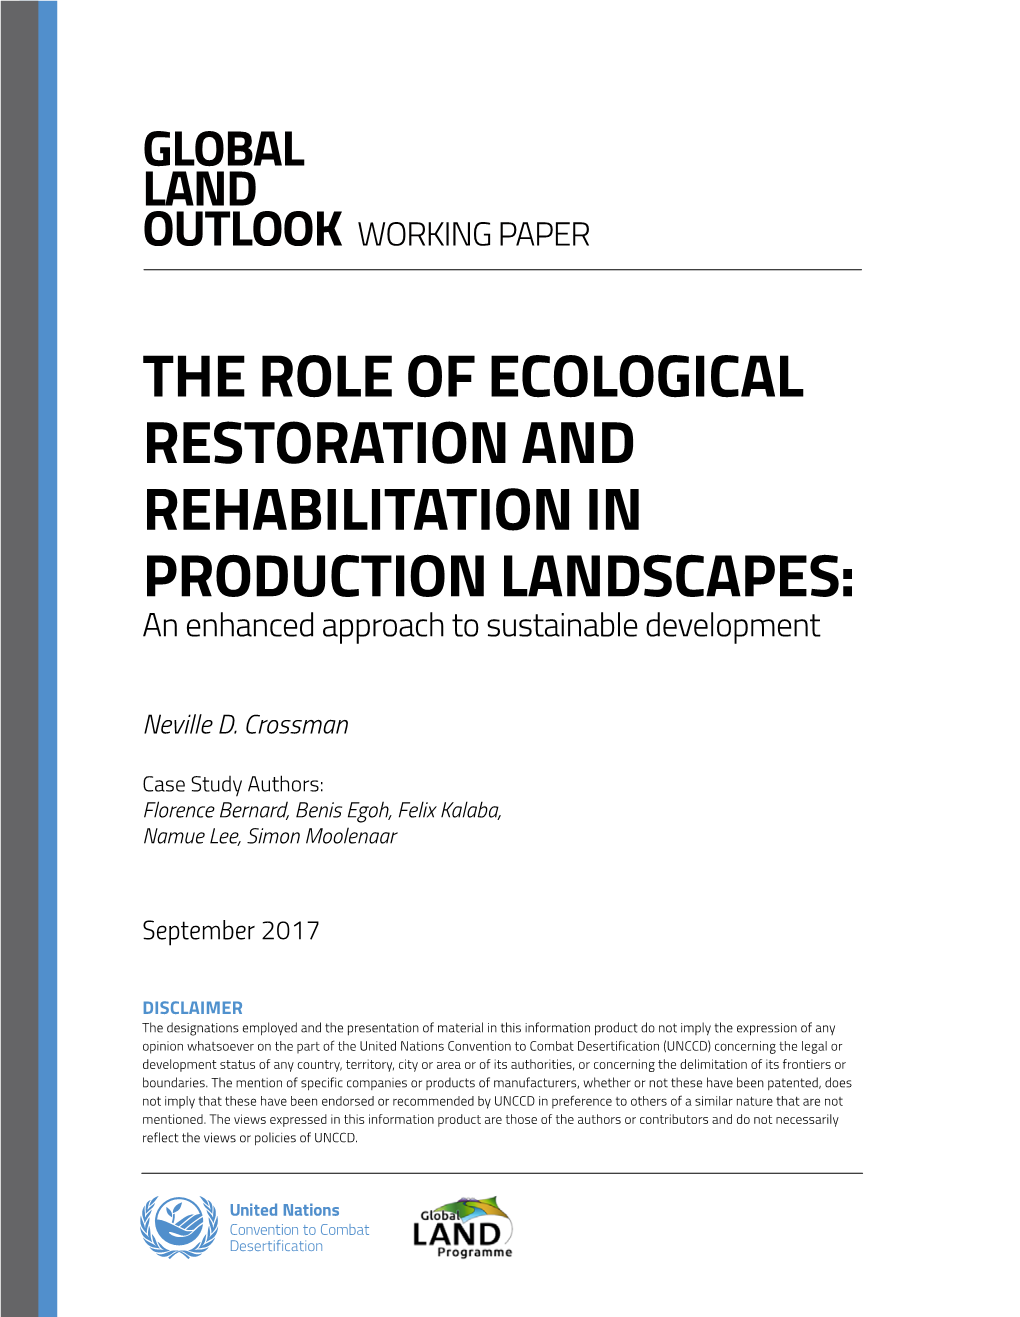 THE ROLE of ECOLOGICAL RESTORATION and REHABILITATION in PRODUCTION LANDSCAPES: an Enhanced Approach to Sustainable Development